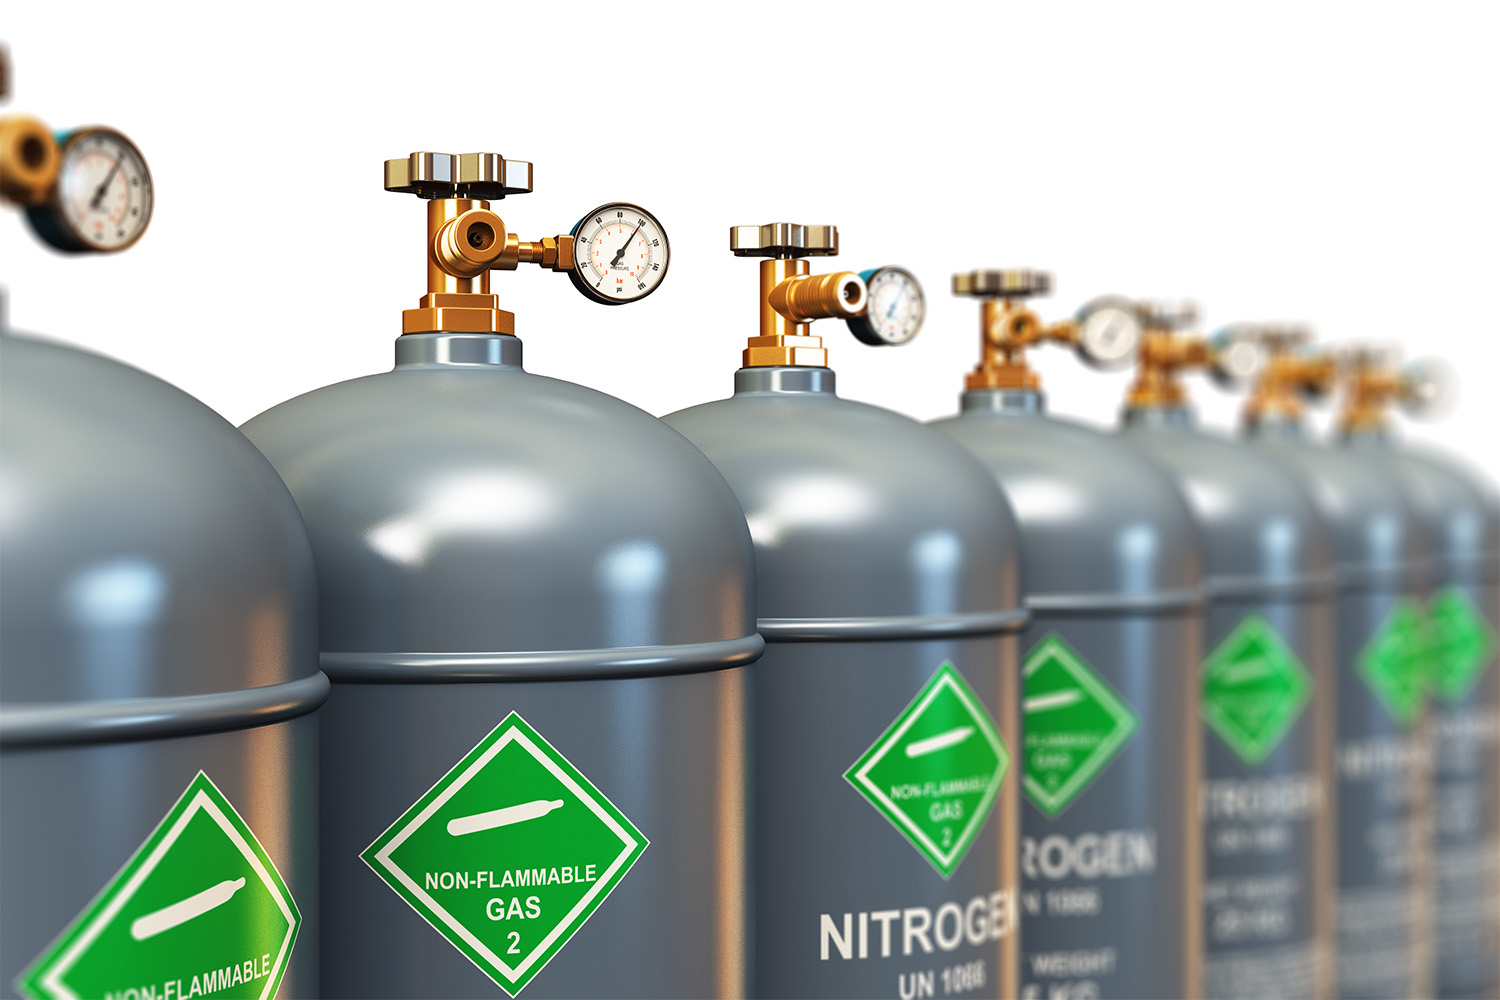 Why Is Nitrogen Gas Used in Food Packaging?